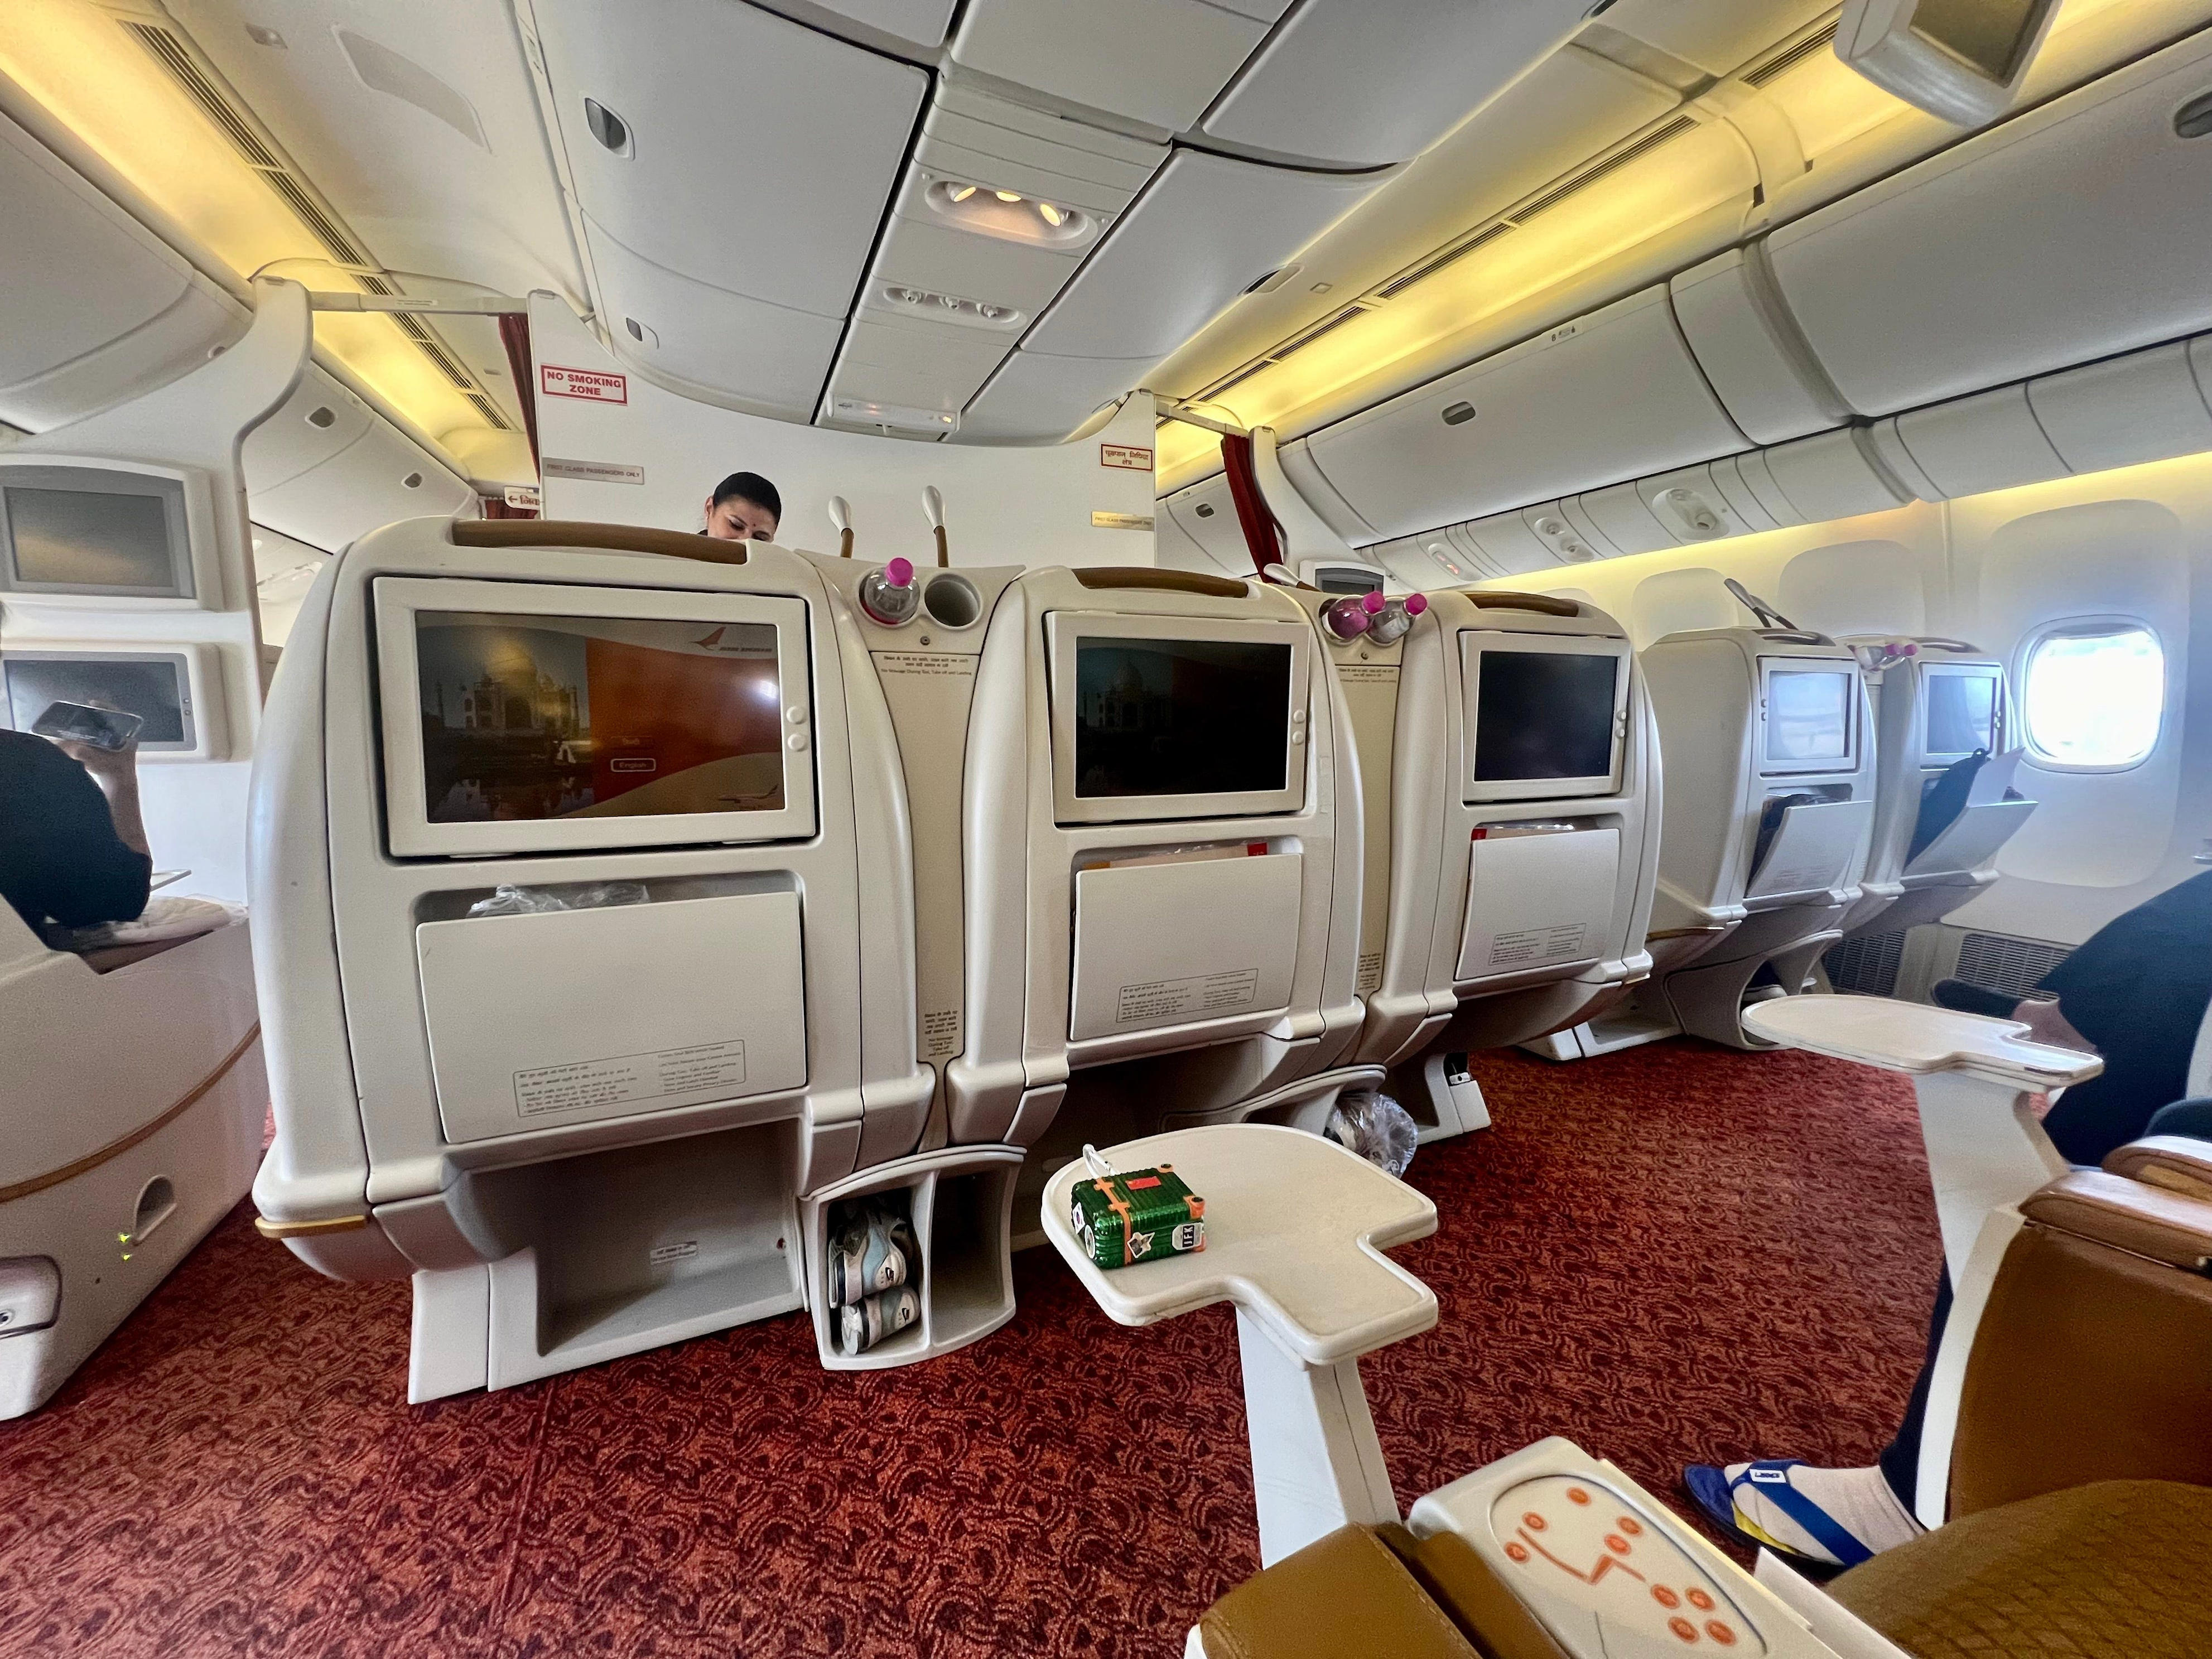 <ul class="summary-list"><li>Air India has a reputation for having an awkward business-class product with regularly broken seats.</li><li>Although the <a href="https://www.businessinsider.com/air-india-new-airbus-a350-big-improvement-tour-review-2024-1">airline is introducing better products</a>, the old seat will fly until at least 2025.</li><li>I tried out the dated product from New York to Delhi — it wasn't great, but could have been worse. </li></ul><p>Air India is getting a makeover.</p><p>Everything started in <strong>2021</strong> when the <a href="https://www.businessinsider.com/air-india-ownership-comes-full-circle-tata-sons-bid-win-2021-10">Tata Group bought back the airline it originally founded</a> in 1932. During its golden days, Air India was considered a top-tier carrier with fancy on-board bars, lounges, and luxe cabins.</p><p>However, the government took over in the 1950s and ran Air India into disarray. Worn-out planes, broken seats, and dirty carpets were just a few of the complaints regularly coming from passengers.</p><p>Under Tata, however, the <a href="https://www.businessinsider.com/see-new-luxury-cabins-air-india-retrofit-onto-boeing-777-2023-8">company has invested hundreds of millions into a total revamp</a> — including everything from updated uniforms to fancy new business class seats.</p><p>To see the transformation, I tried out Air India's old — and notoriously awkward — Boeing 777-300ER business class product from New York to New Delhi (Business Insider paid a media rate).</p><p>Here's why the cabin wasn't as miserable as I thought it would be.</p><div class="read-original">Read the original article on <a href="https://www.businessinsider.com/air-india-business-class-boeing-777-review-photos-2024-1">Business Insider</a></div>